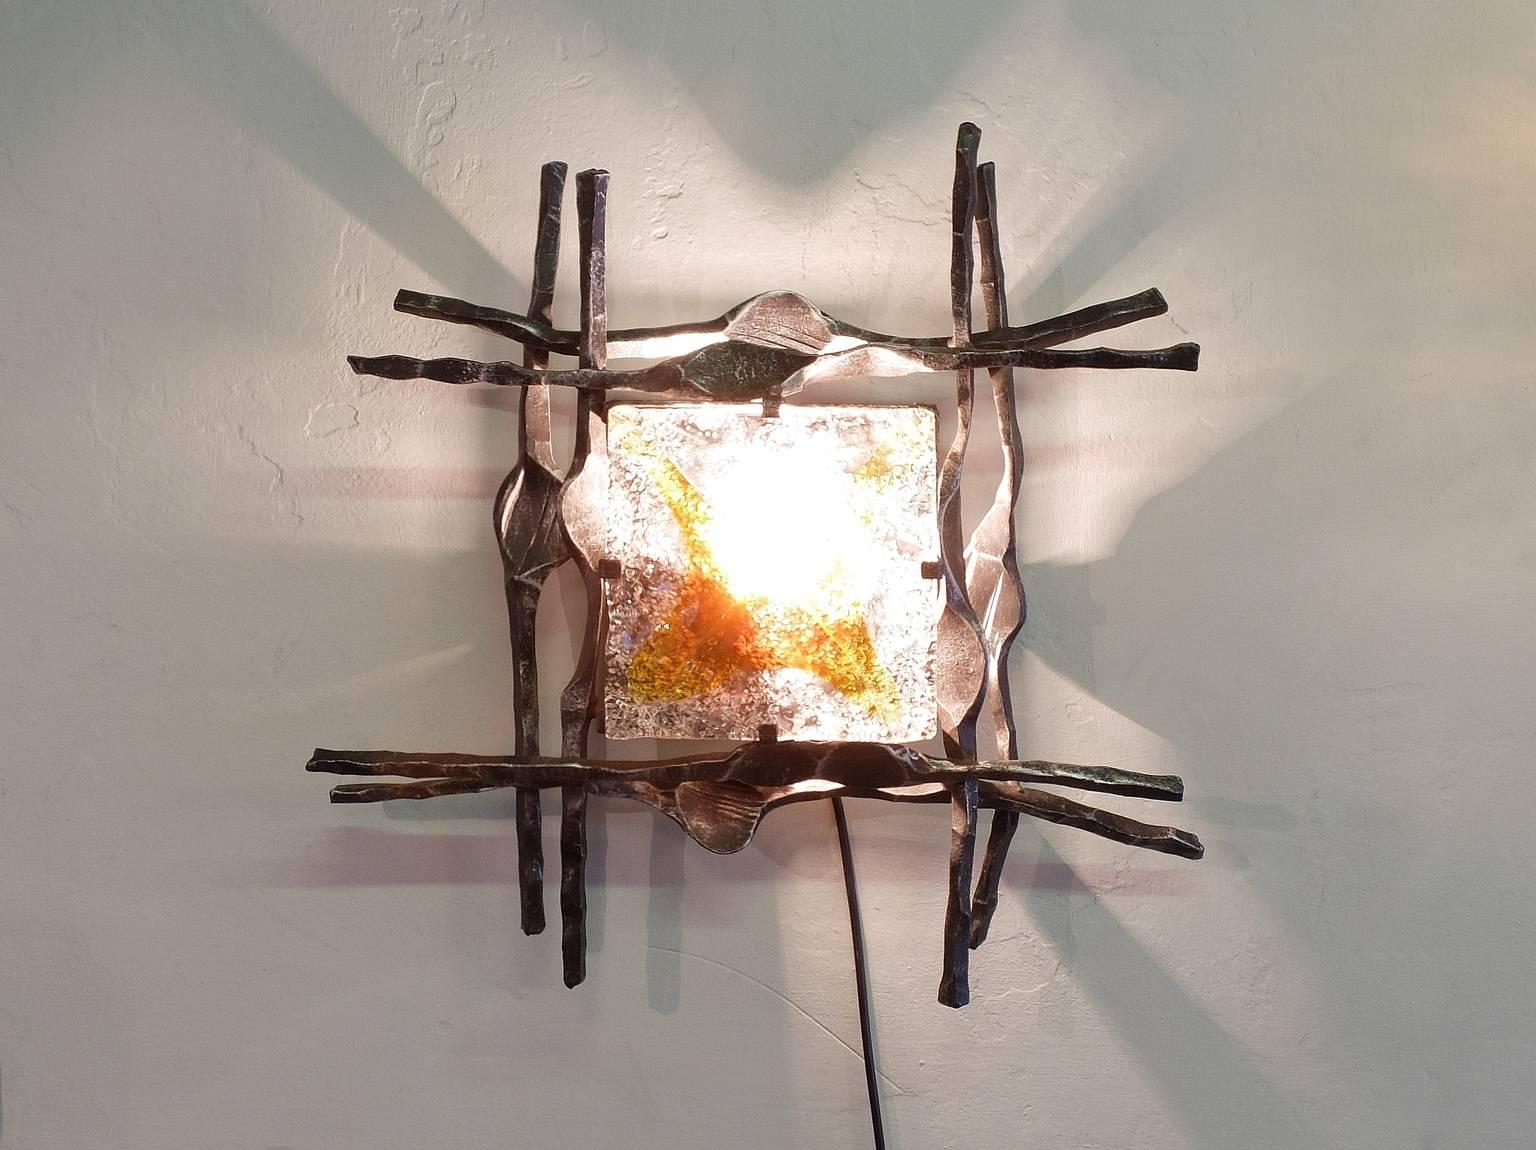 A large wall sconce from Swedish design company A & E Design, circa 1970, in the Brutalist style. The hand-wrought iron surround has a good patination and is set off by the Mazzega Murano glass with clear and amber tones. This wall light has been